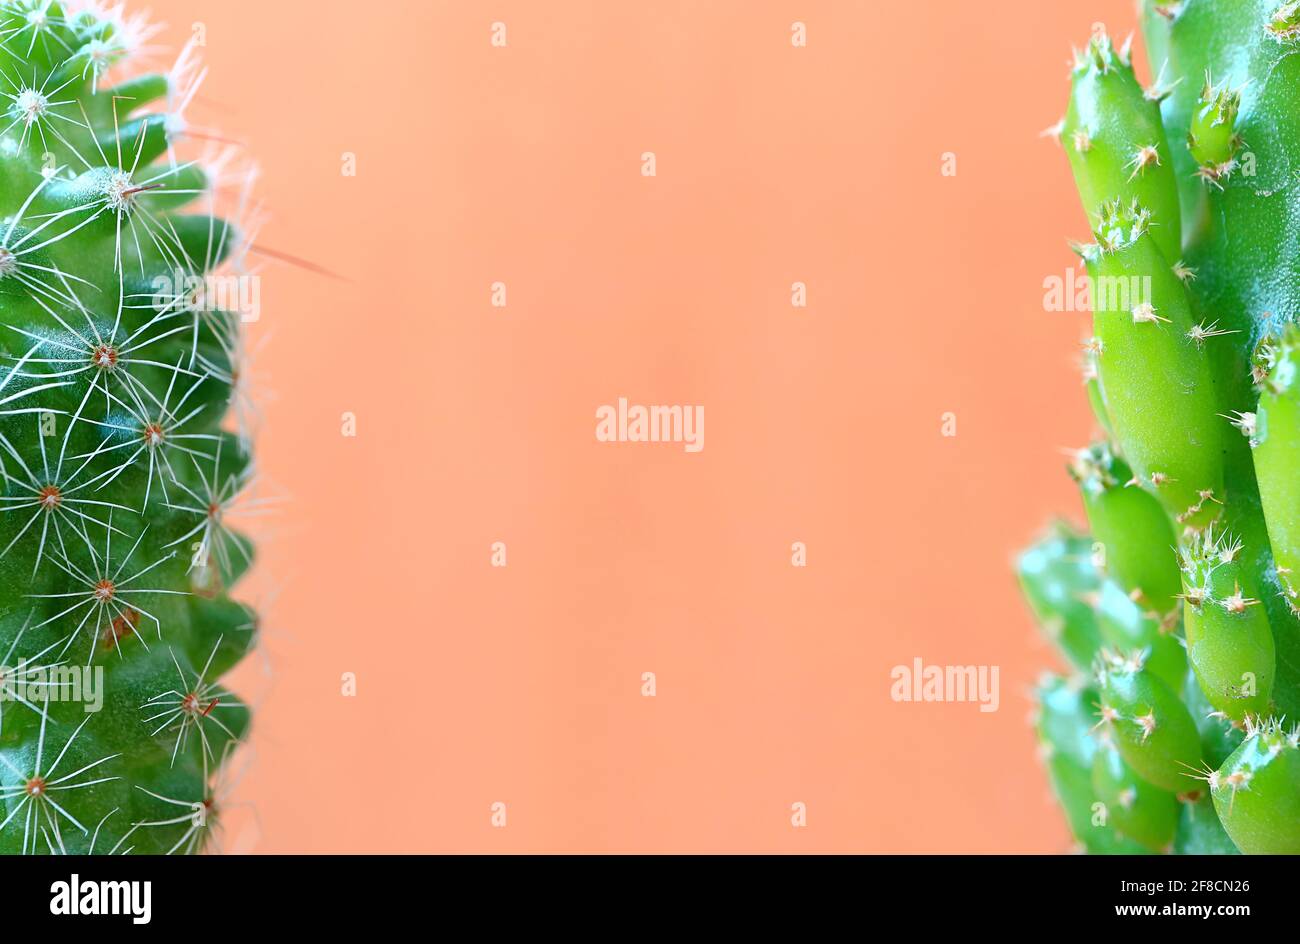 Closeup of Partially Mini Fairy Castle Cactus and Ladyfinger Cactus Isolated on Salmon Pink Background Stock Photo